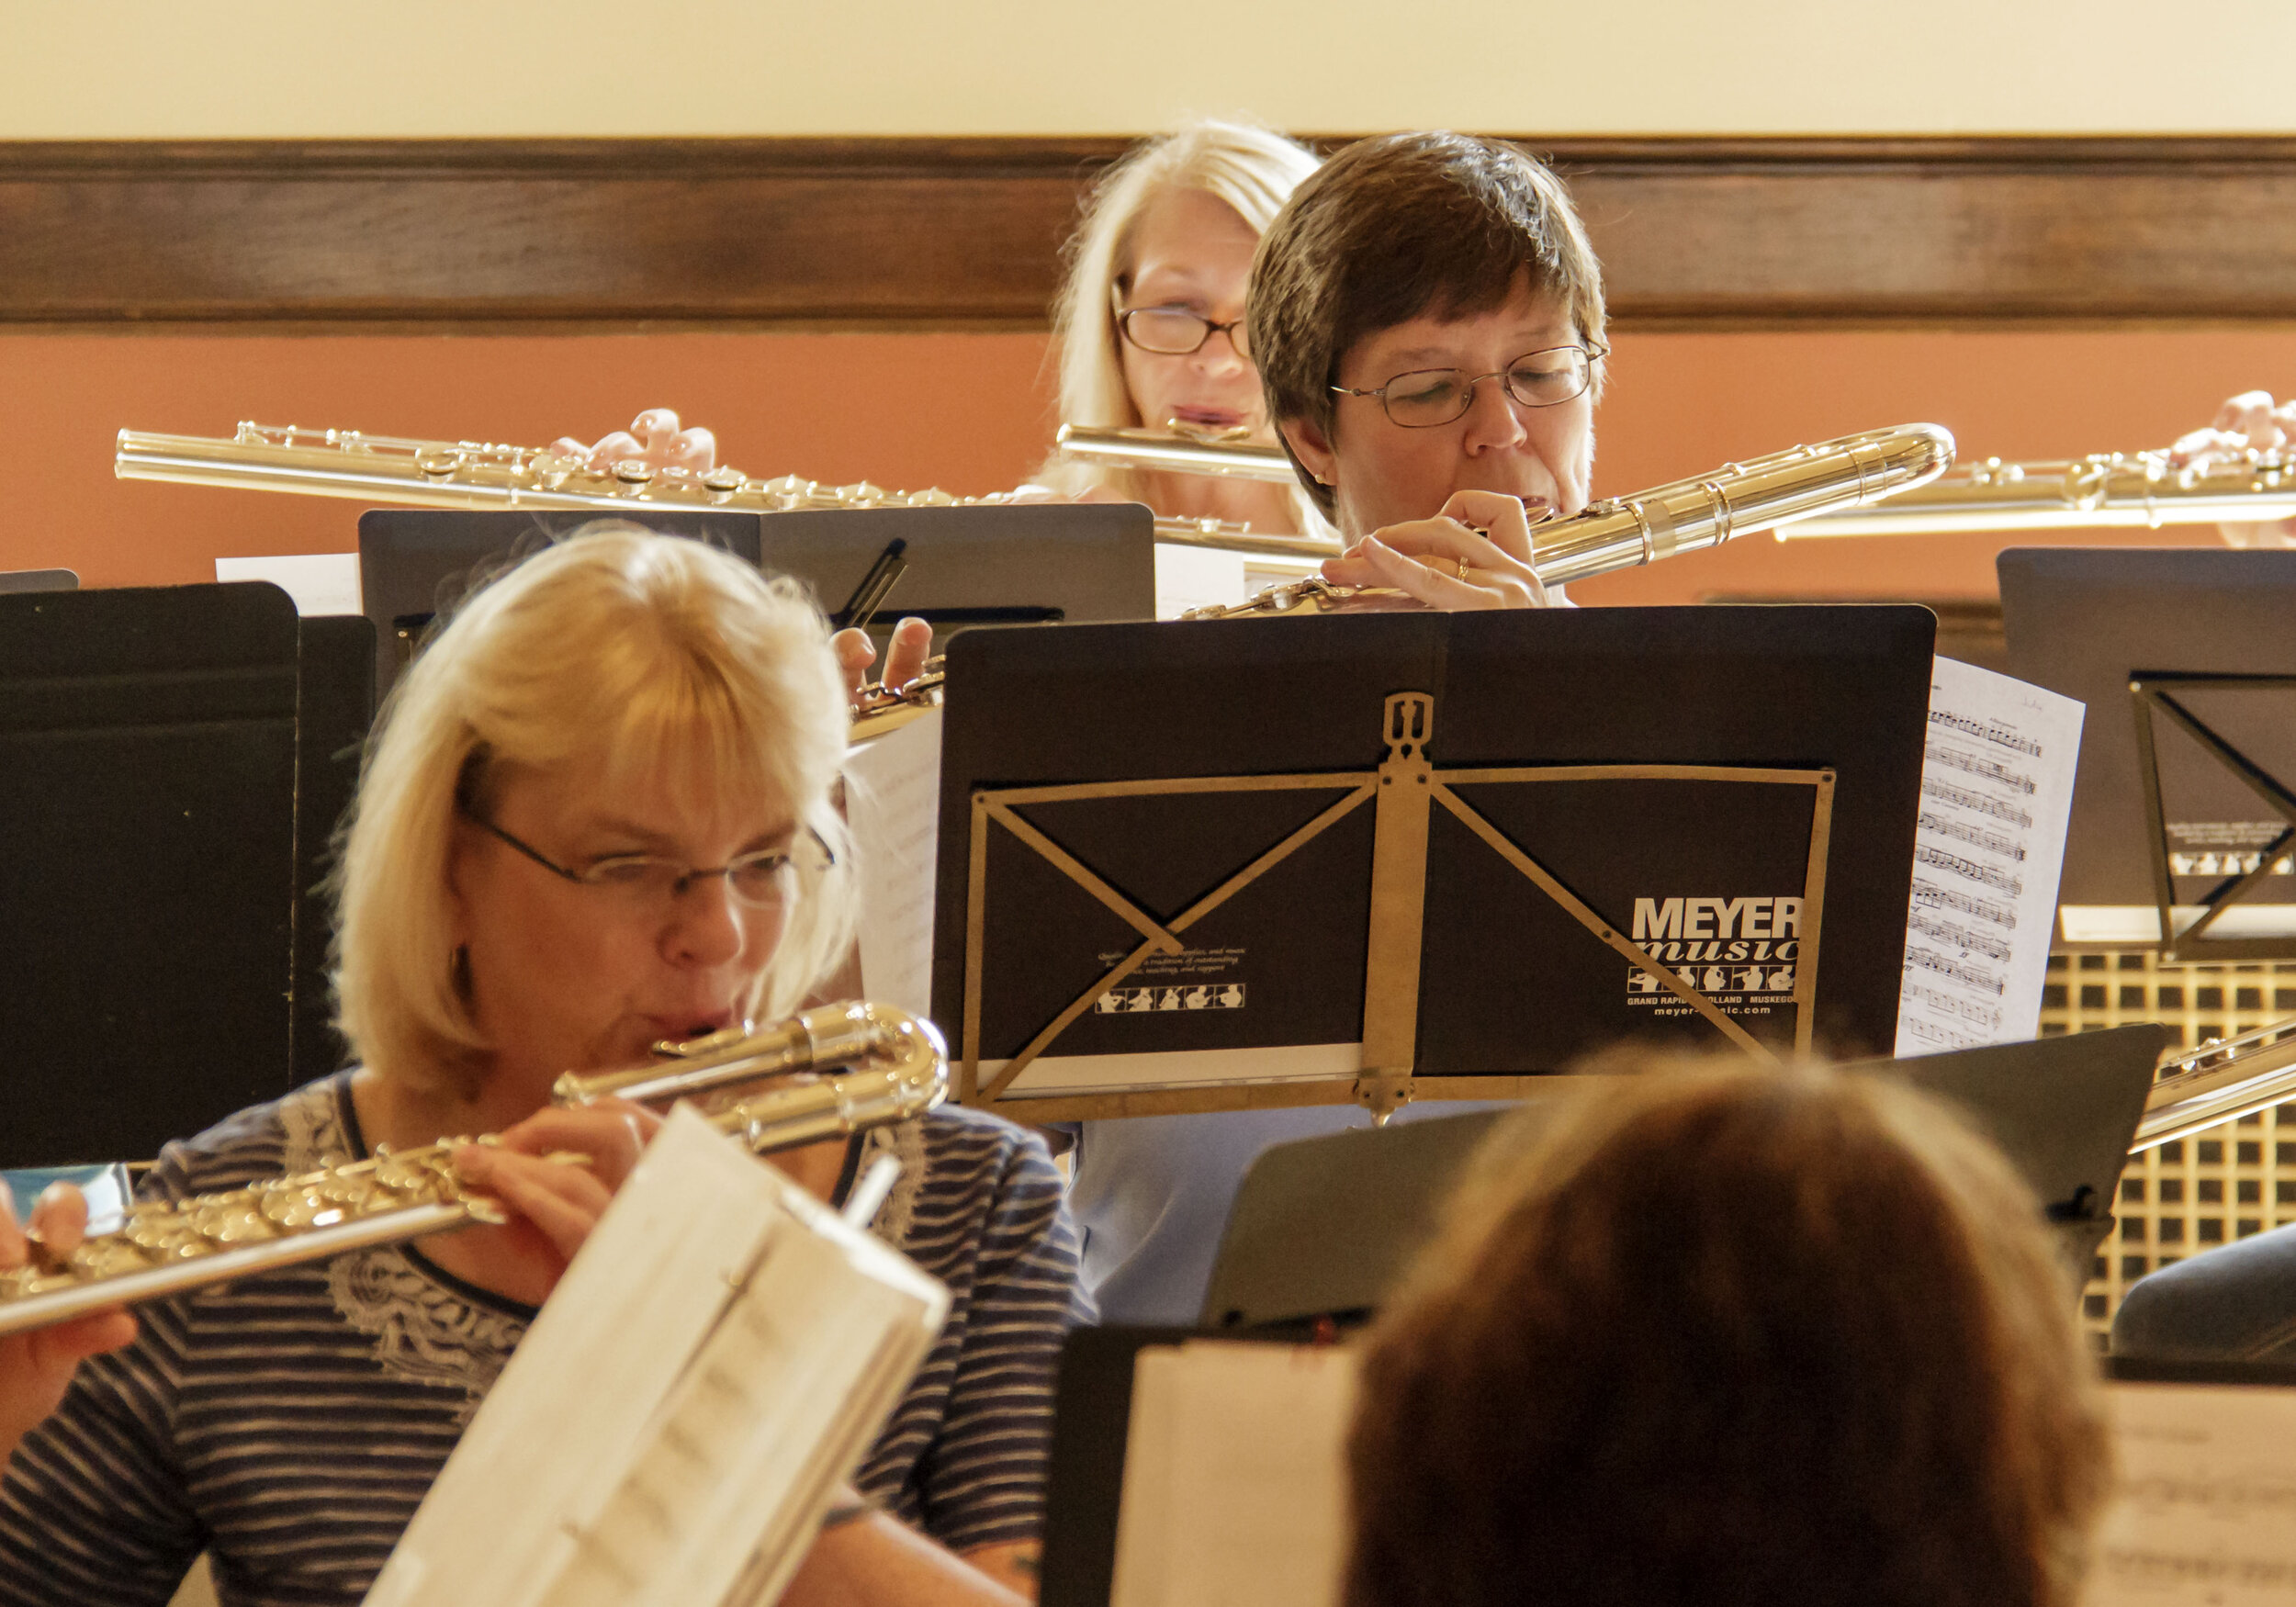 Members playing alto and bass flutes